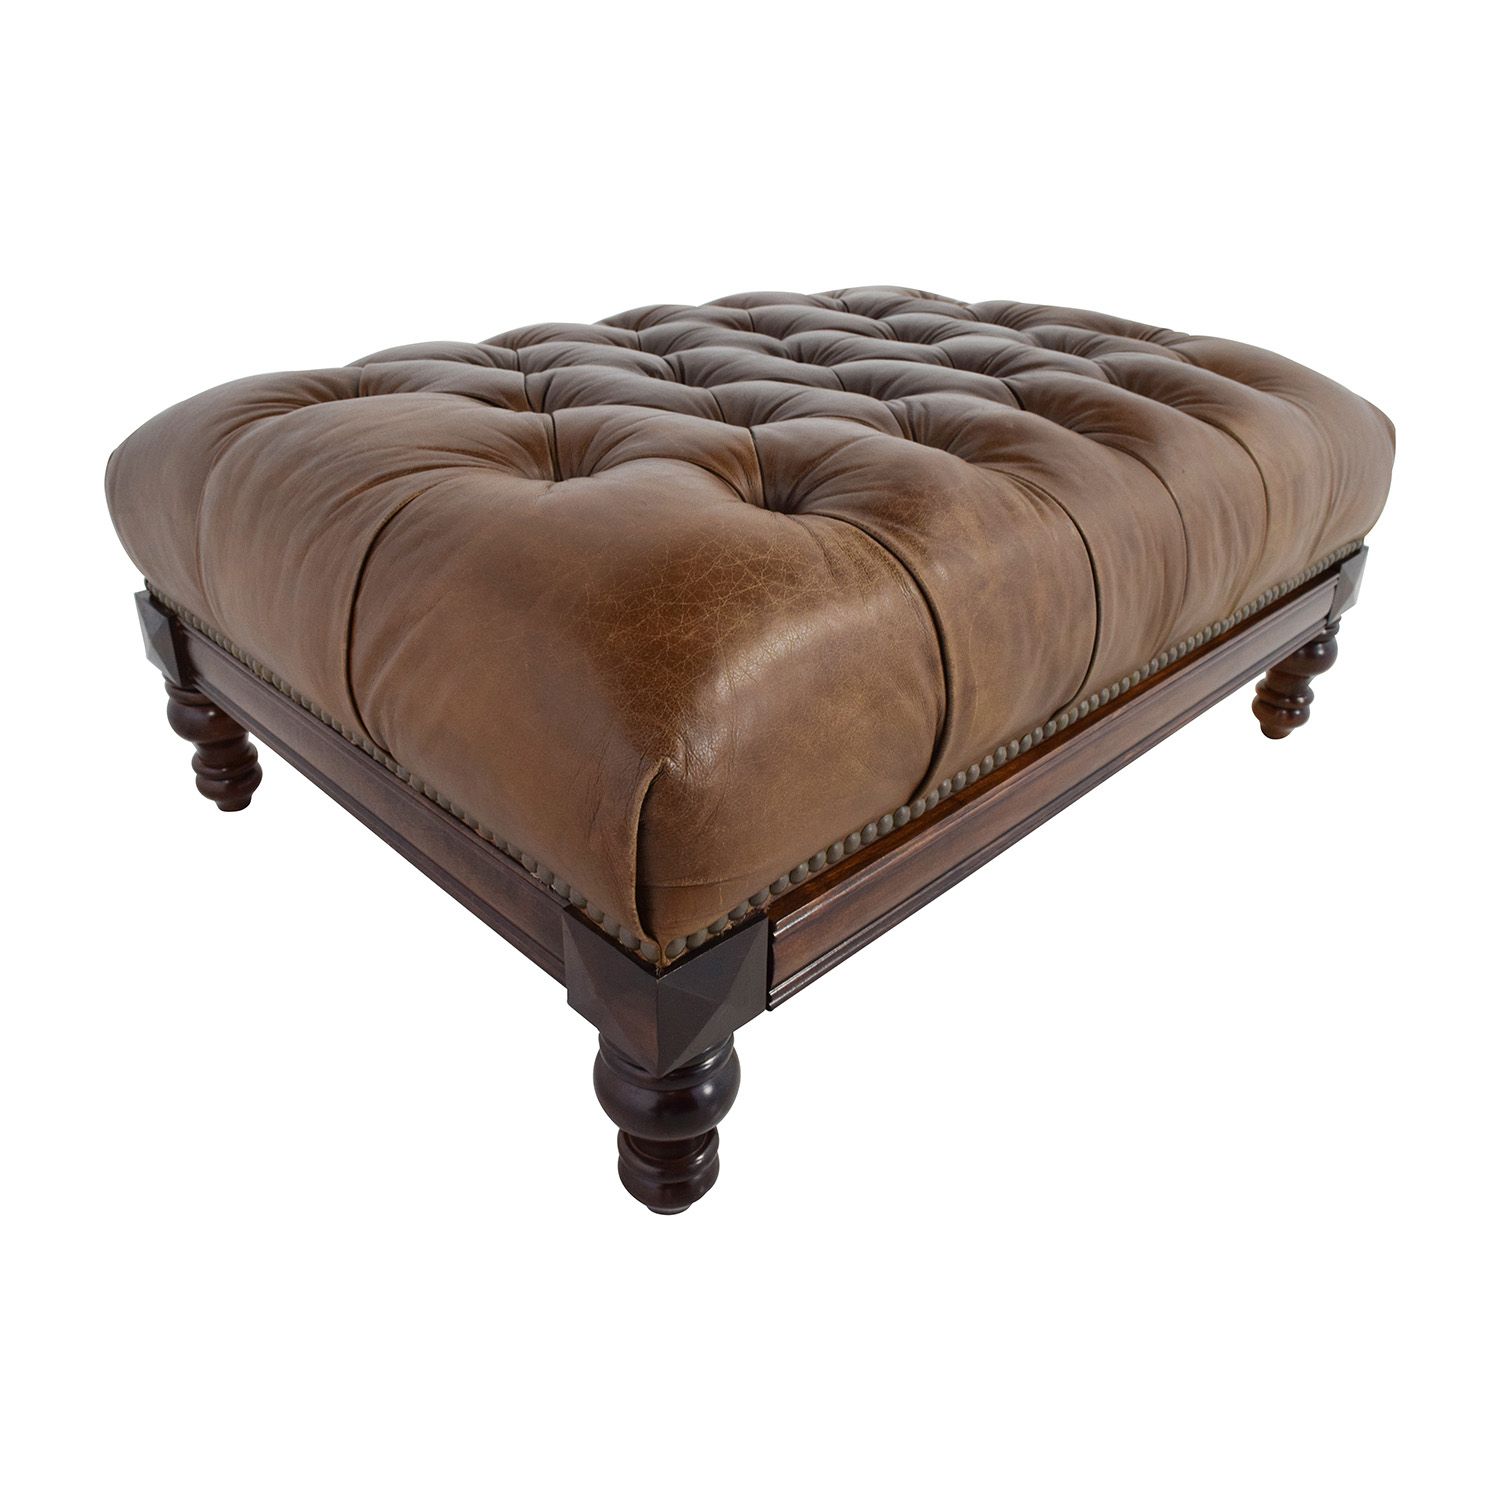 77% Off – Antique Tufted Leather Ottoman With Secret Storage / Storage Within Leather Pouf Ottomans (View 17 of 20)